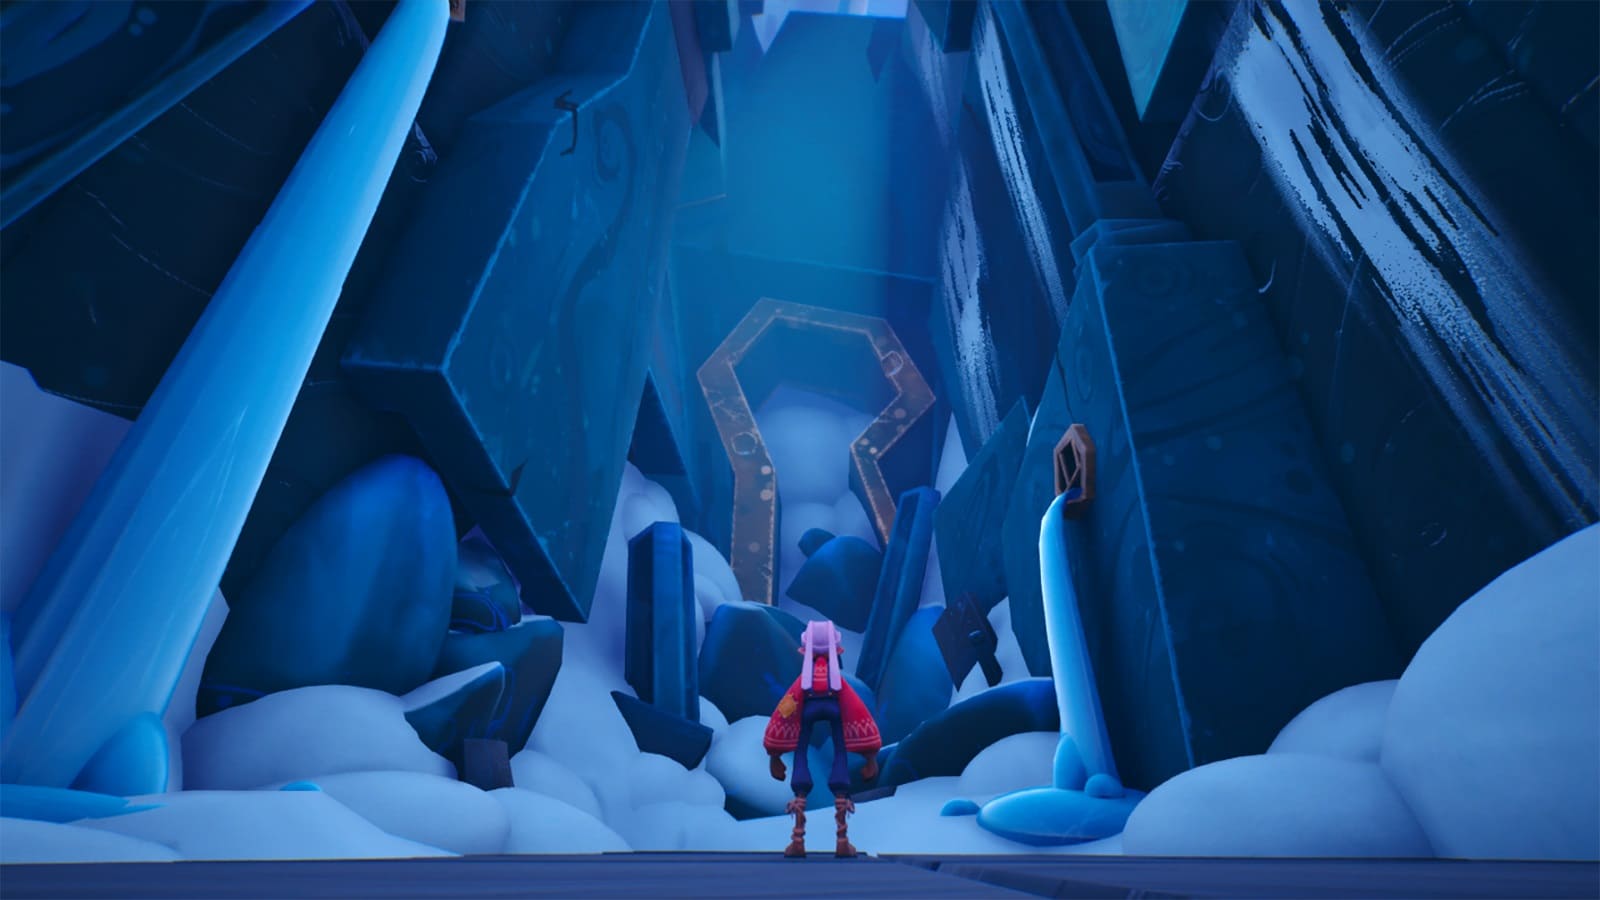 A character is standing in front of a lock-shaped door surrounded by snow